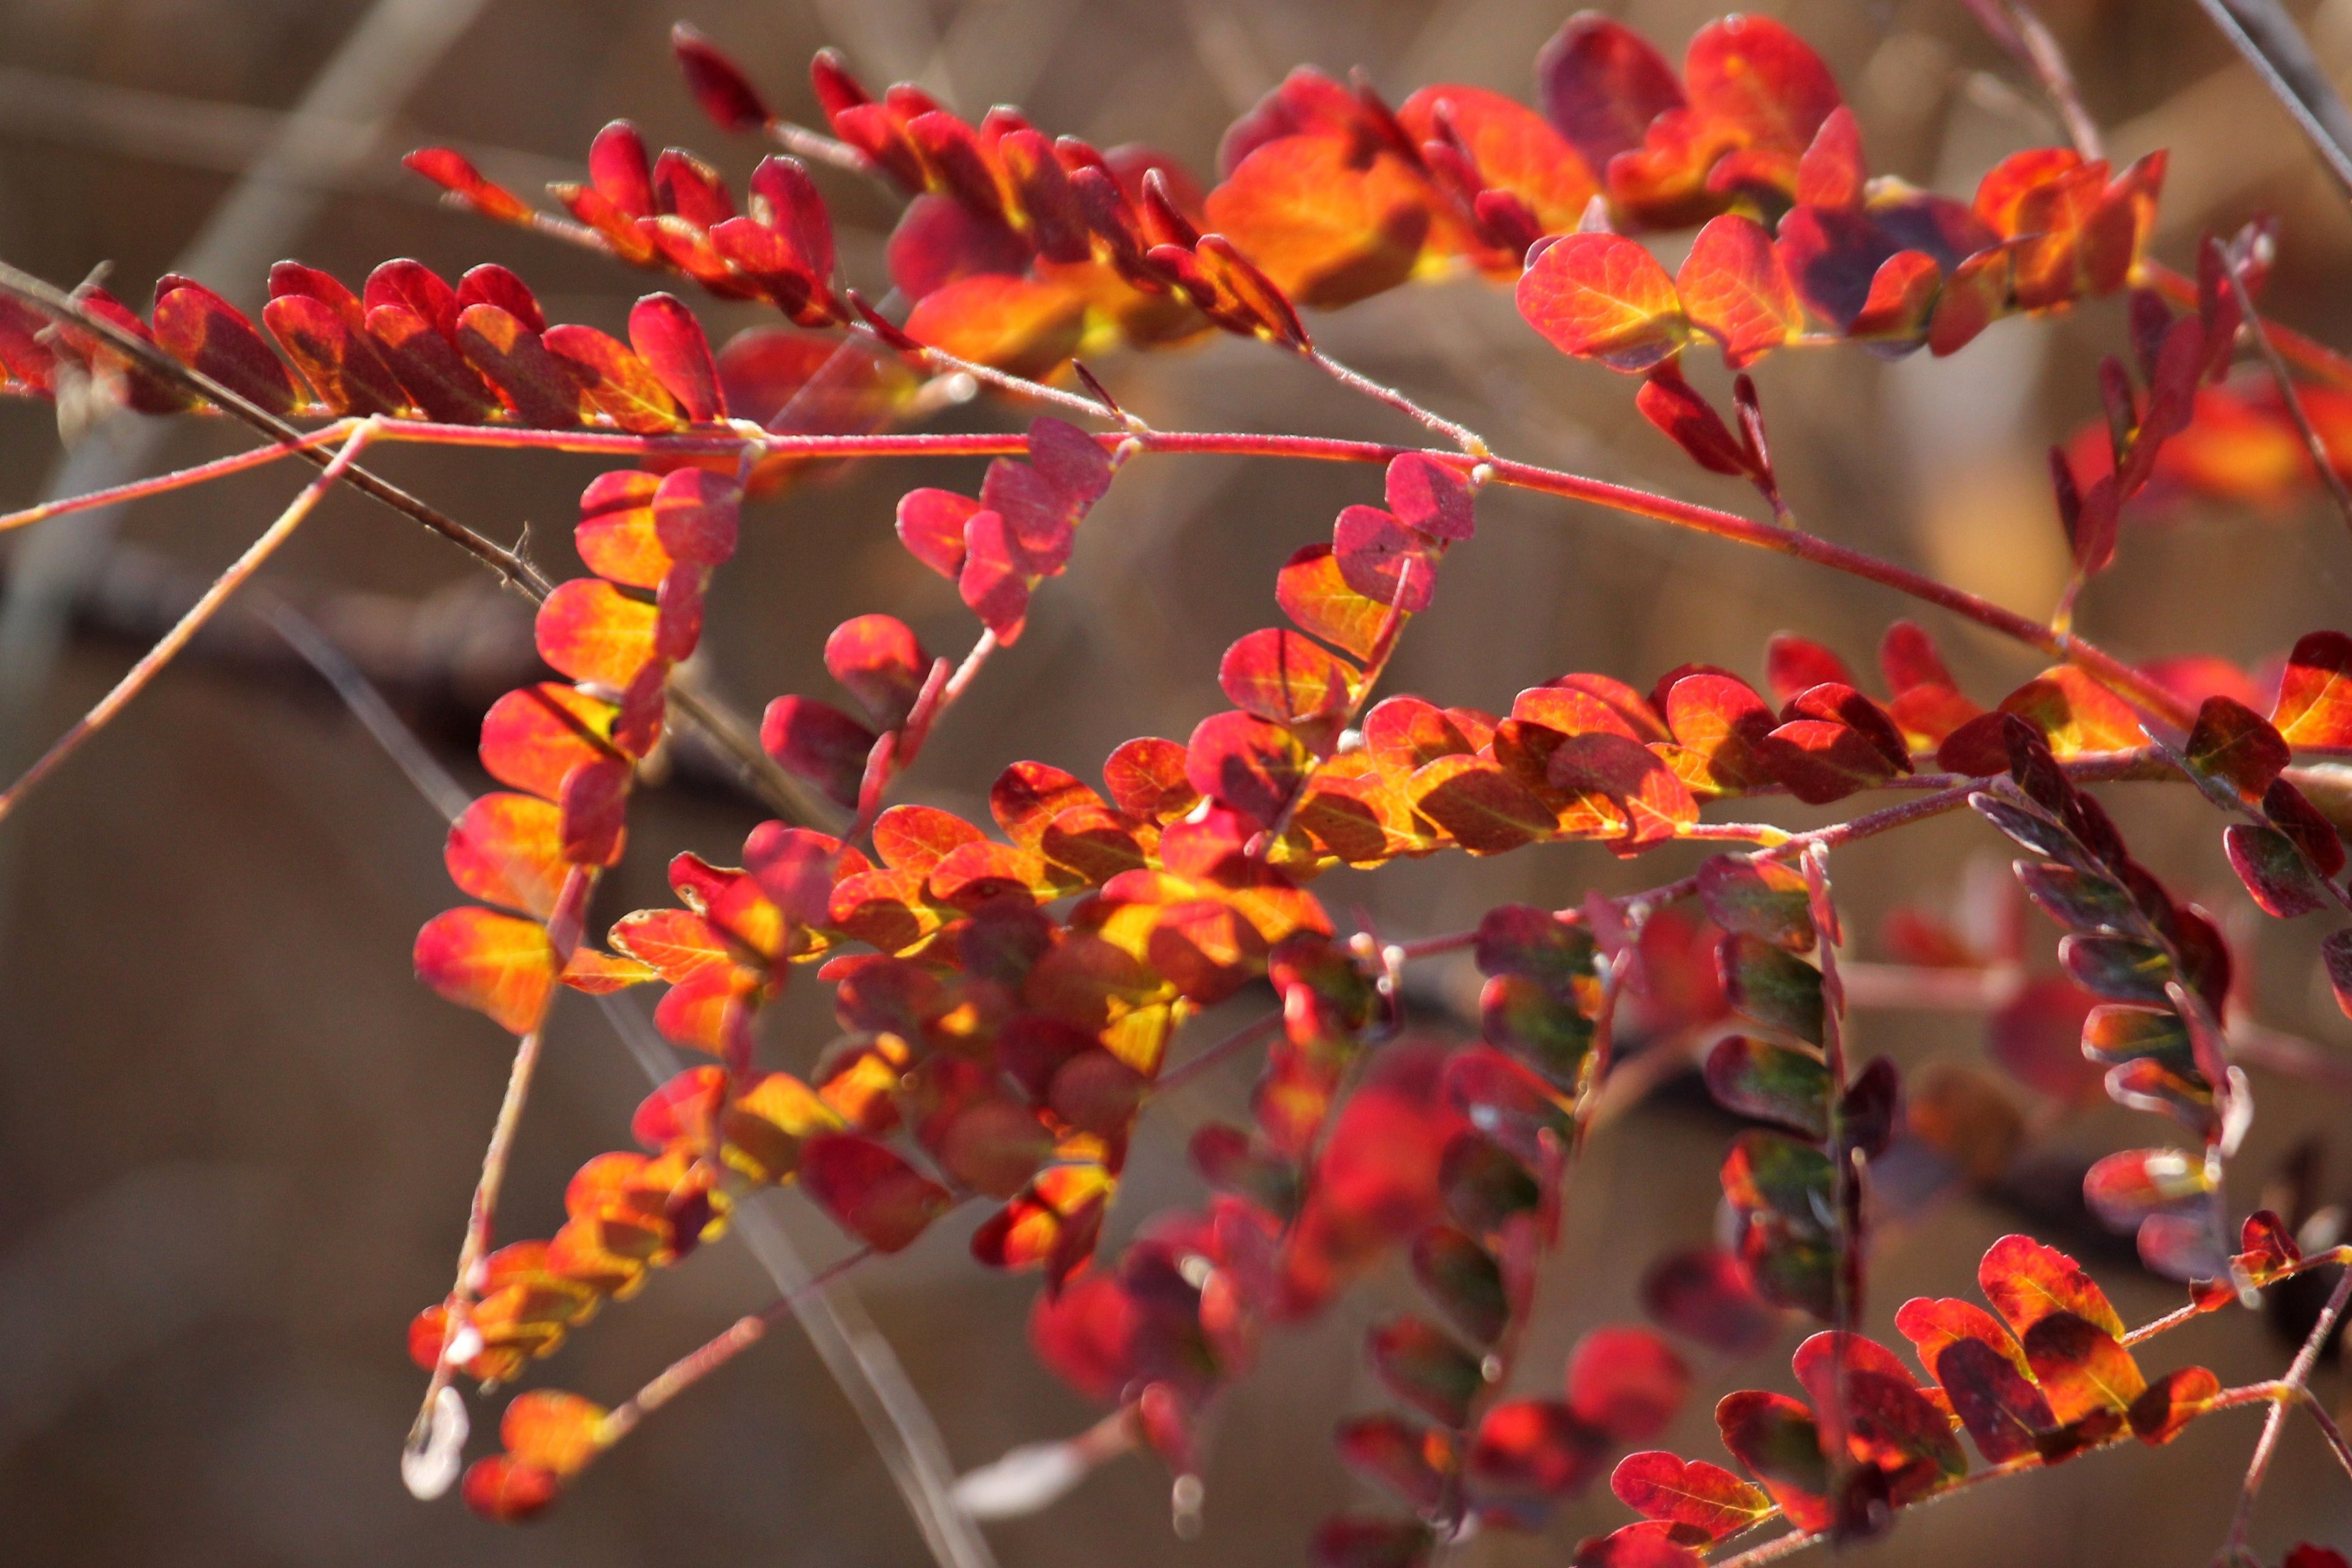 Branches of a plant turning red in the autumn season.